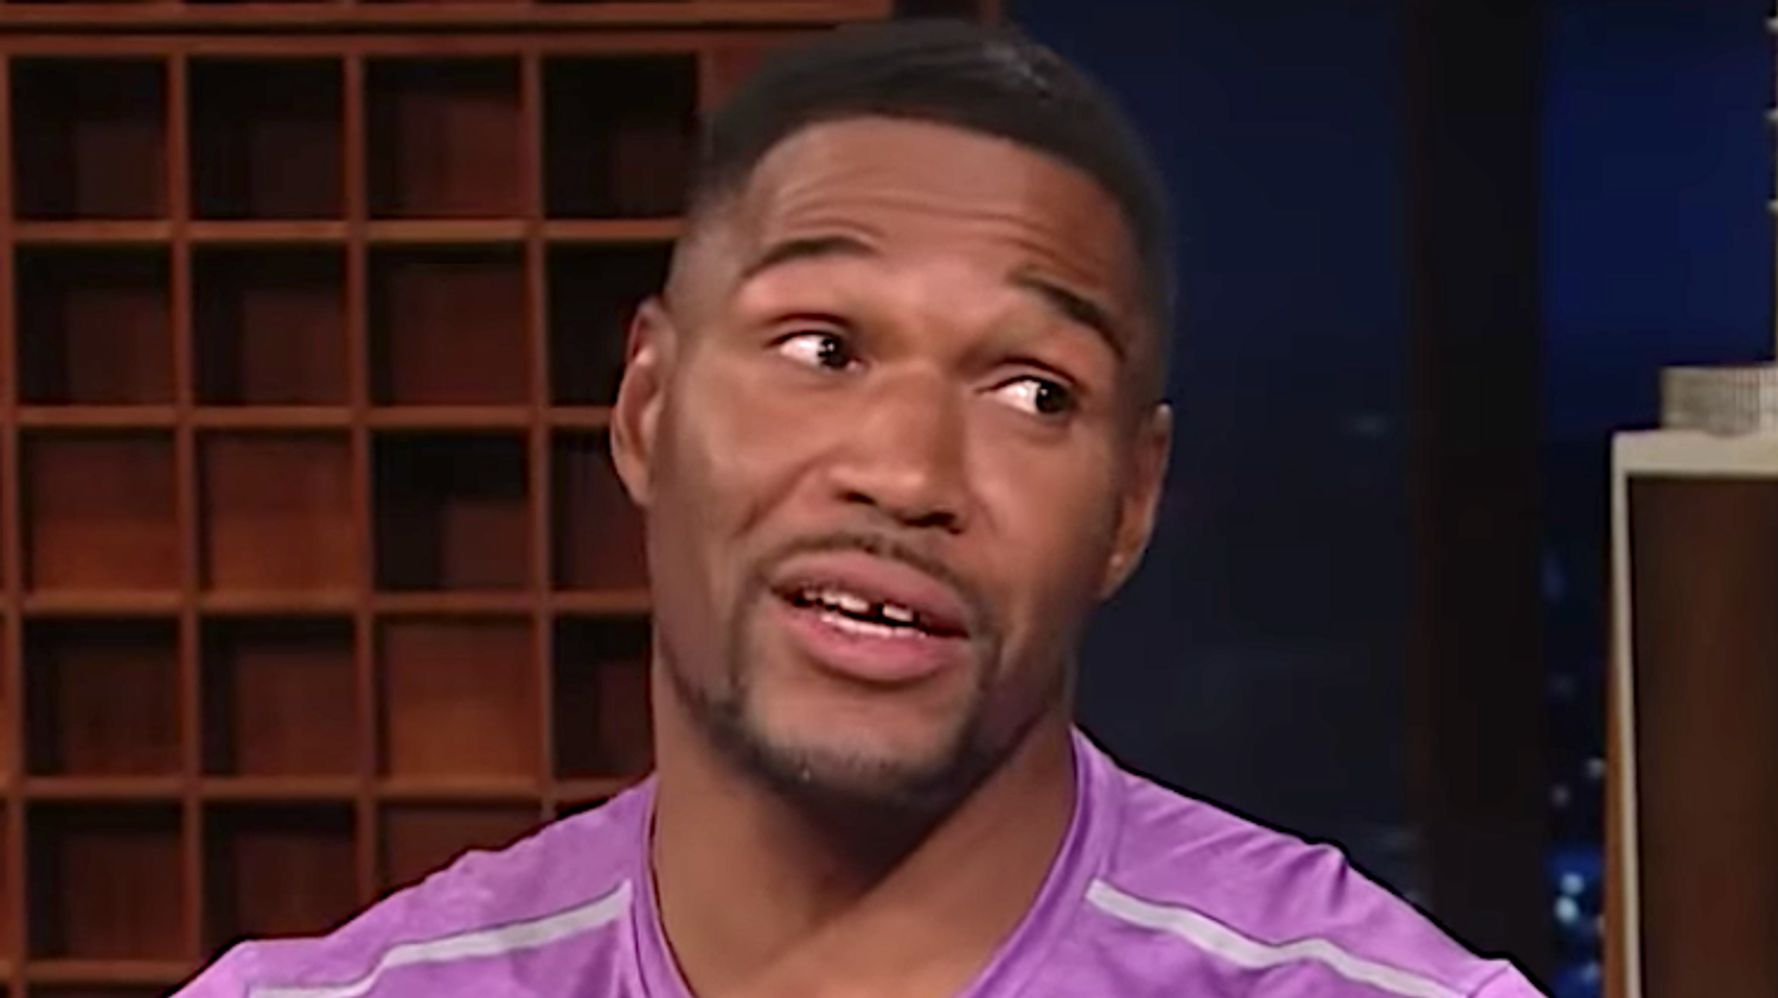 Michael Strahan Makes Surprising Admission About The Greatest Pressure He Has Felt